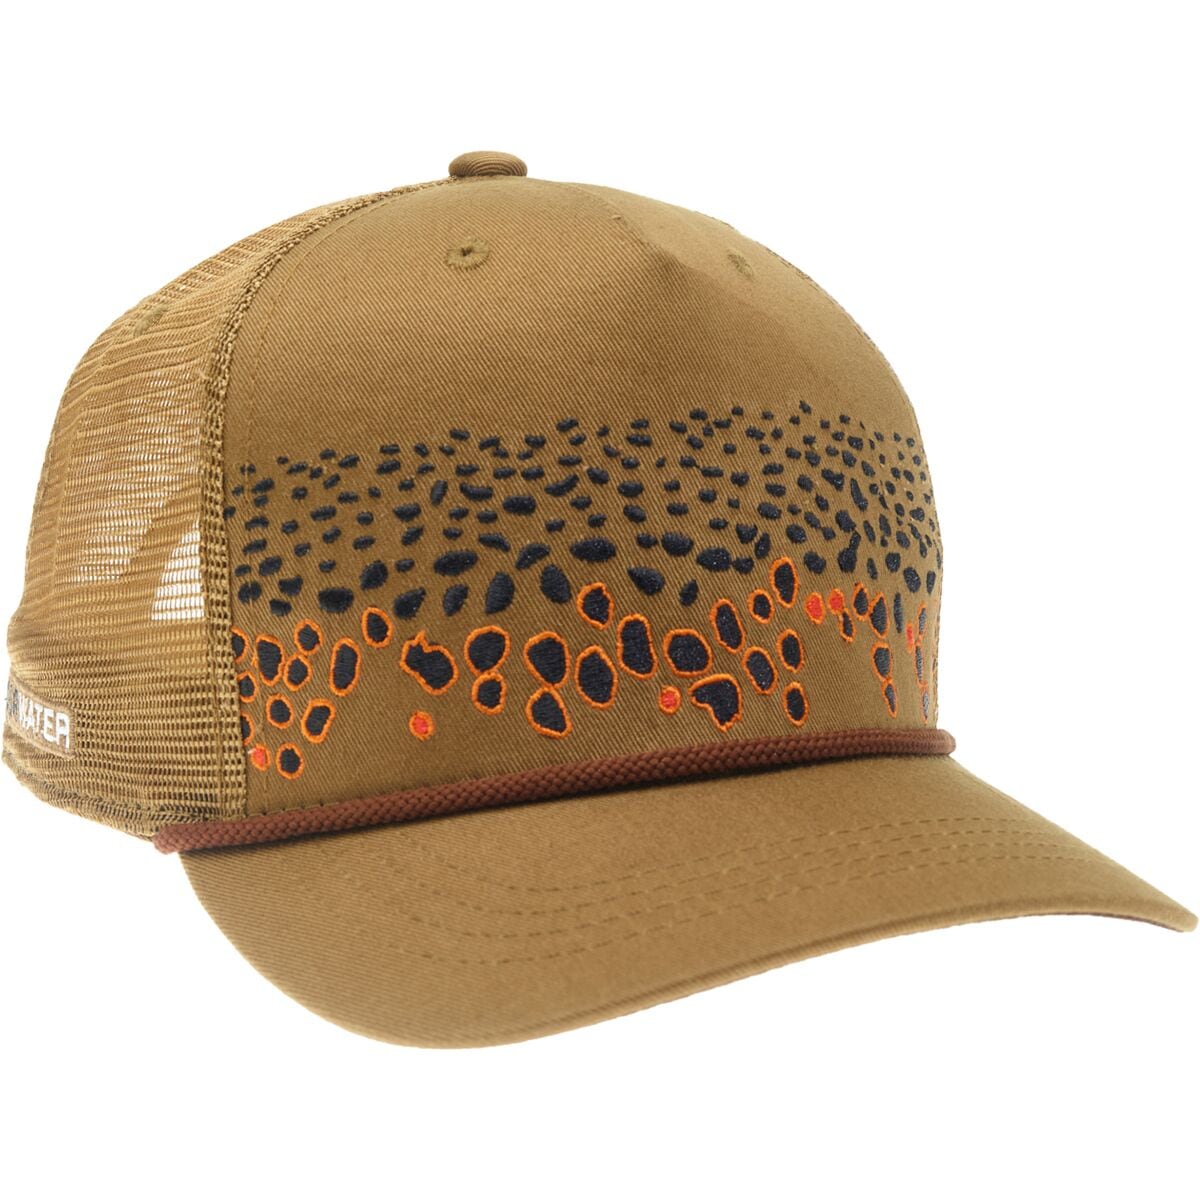 Rep Your Water Brown Trout Skin 2.0 5-Panel Trucker Hat